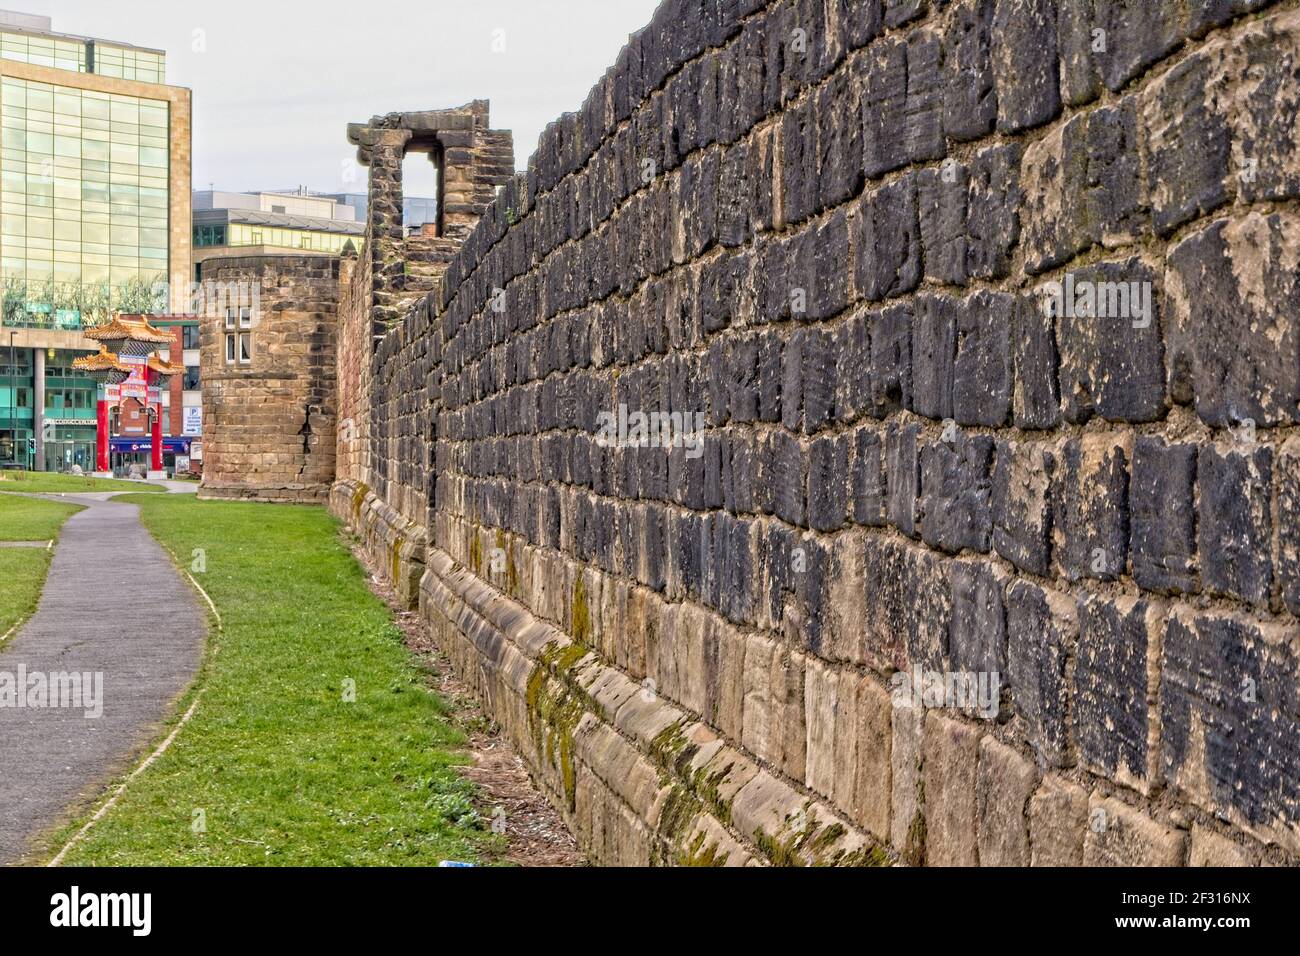 The Newcastle town wall is a medieval defensive wall, and Scheduled Ancient Monument, in Newcastle upon Tyne, England. It was built during the 13th an Stock Photo